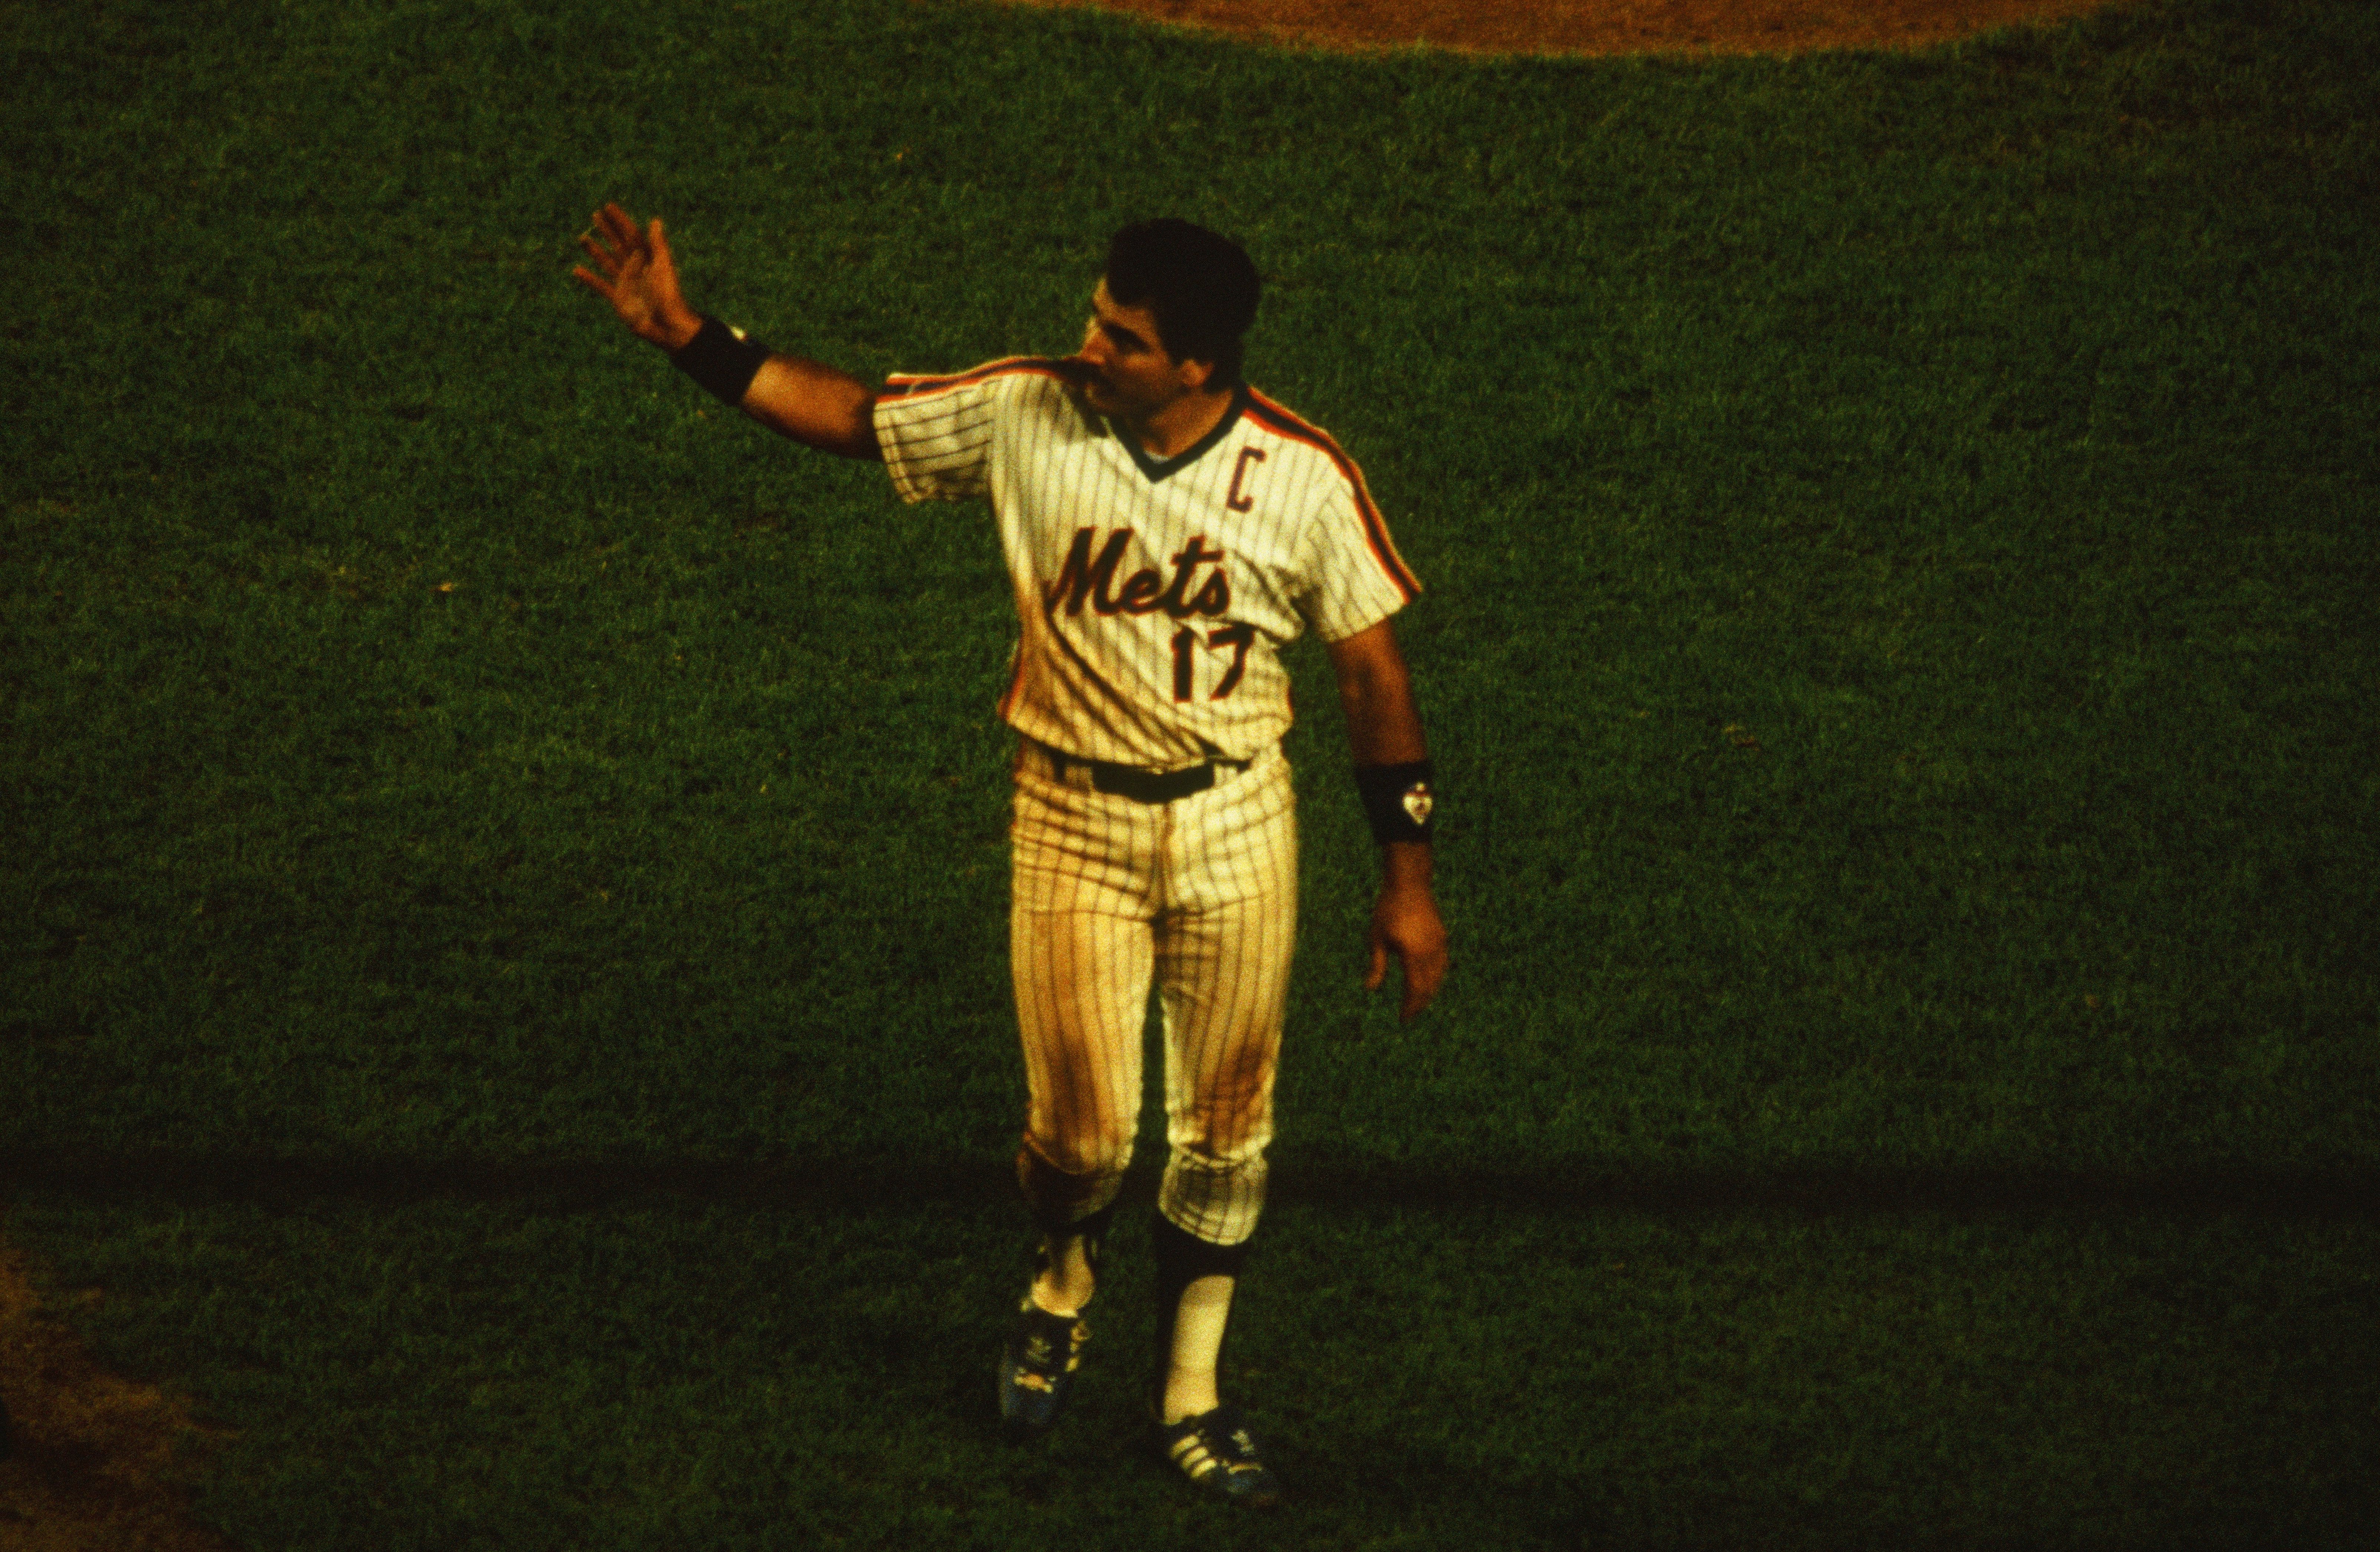 Keith Hernandez Waves to the Mets Fans